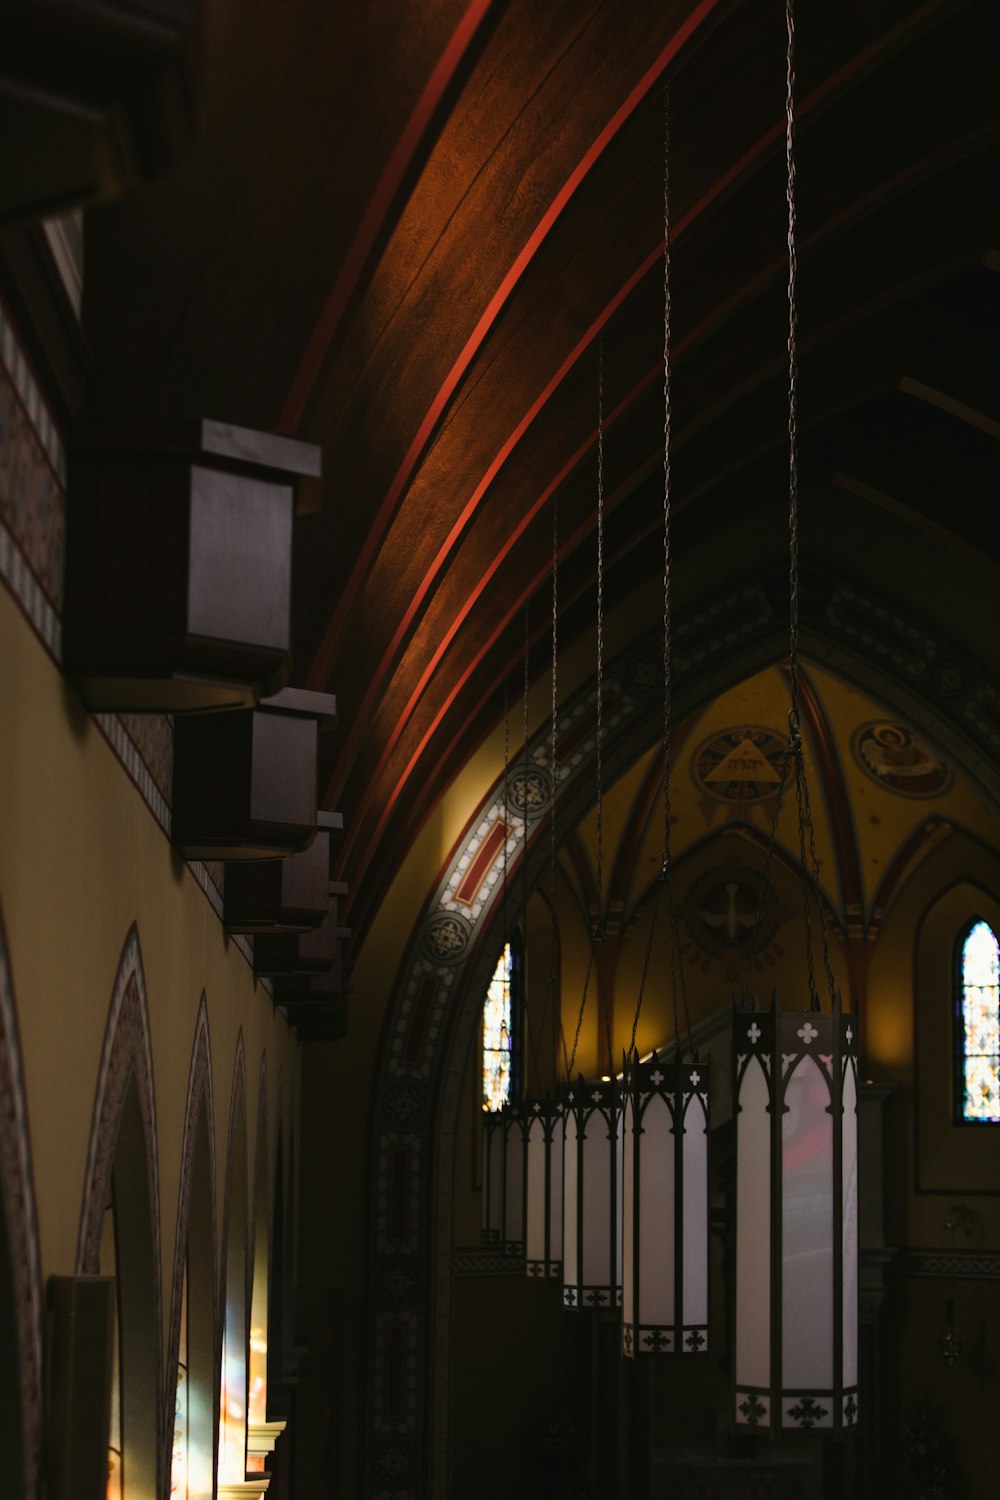 a church with stained glass windows and a wooden ceiling